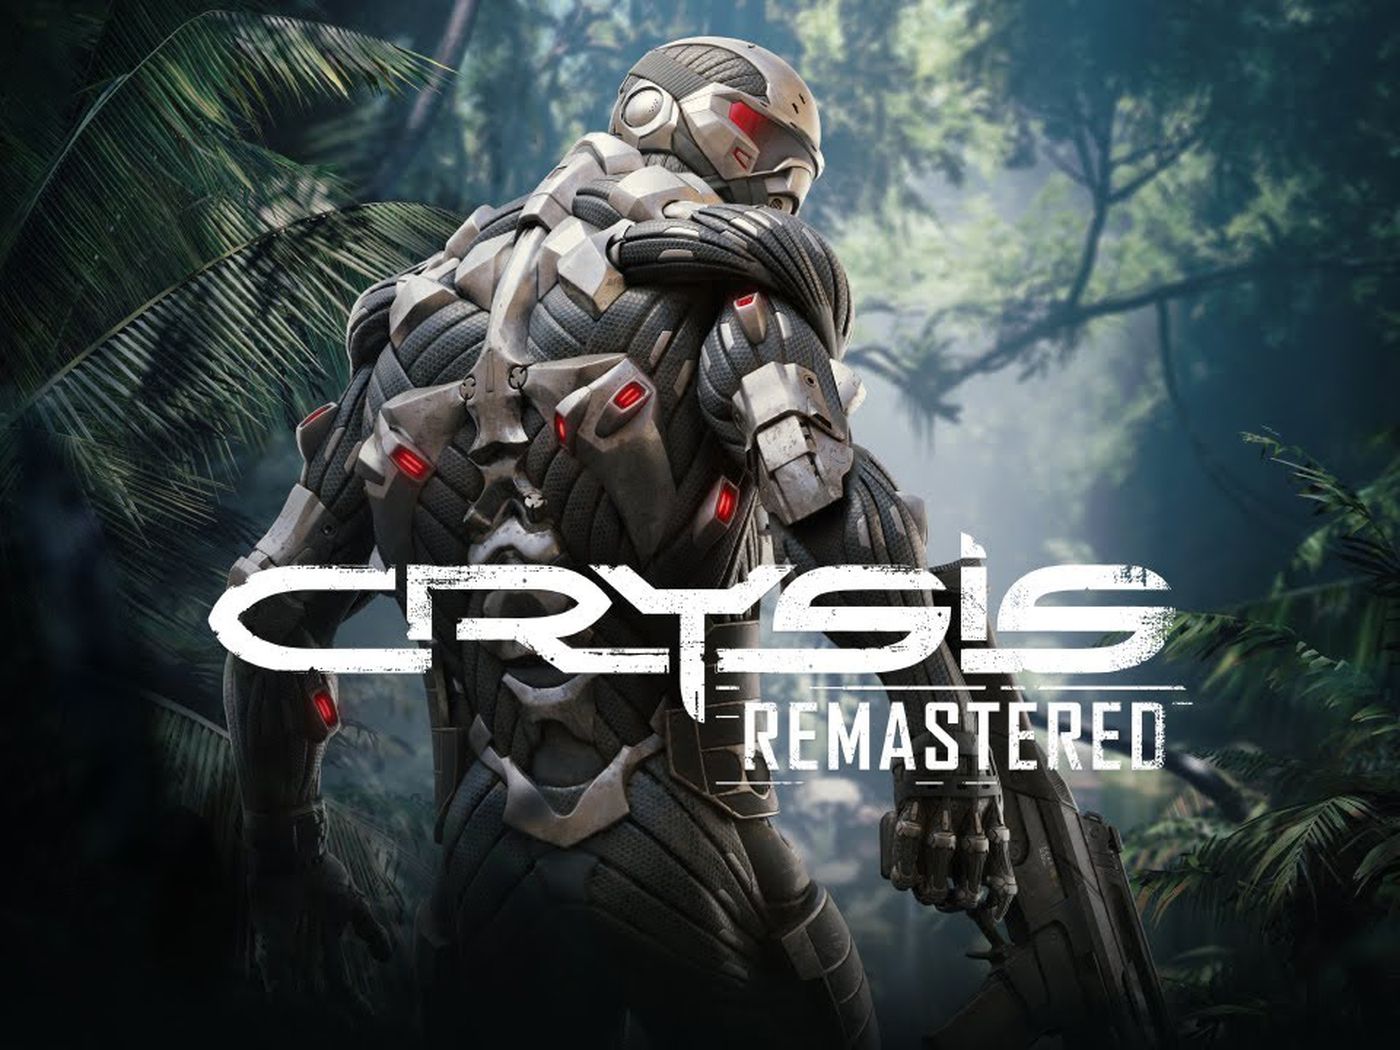 Fans are upset with Crysis Remastered's graphics, so Crytek is delaying the game